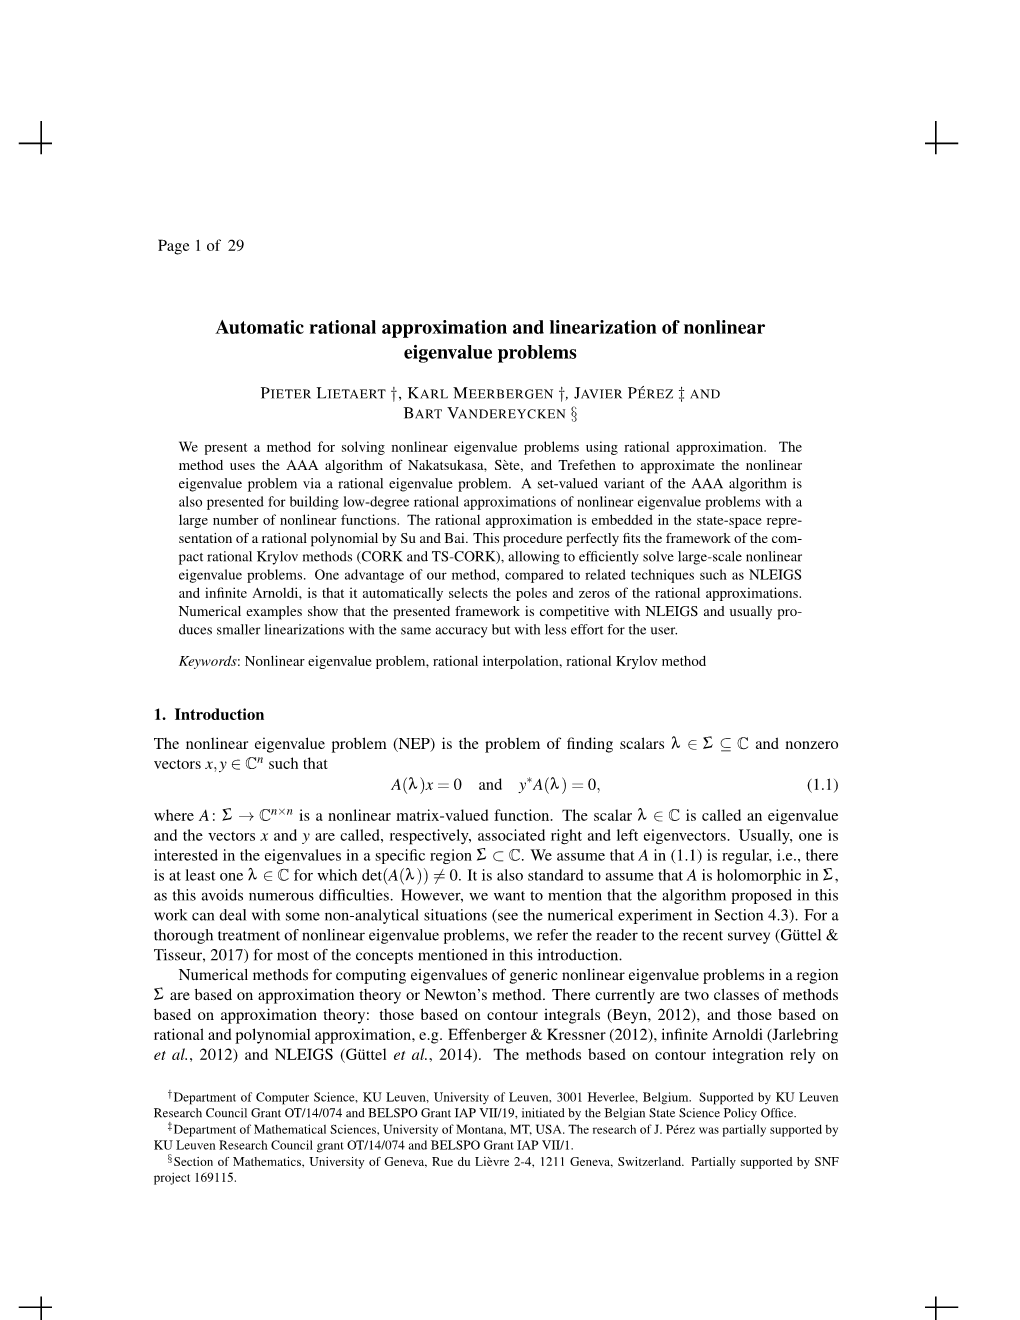 Automatic Rational Approximation and Linearization of Nonlinear Eigenvalue Problems